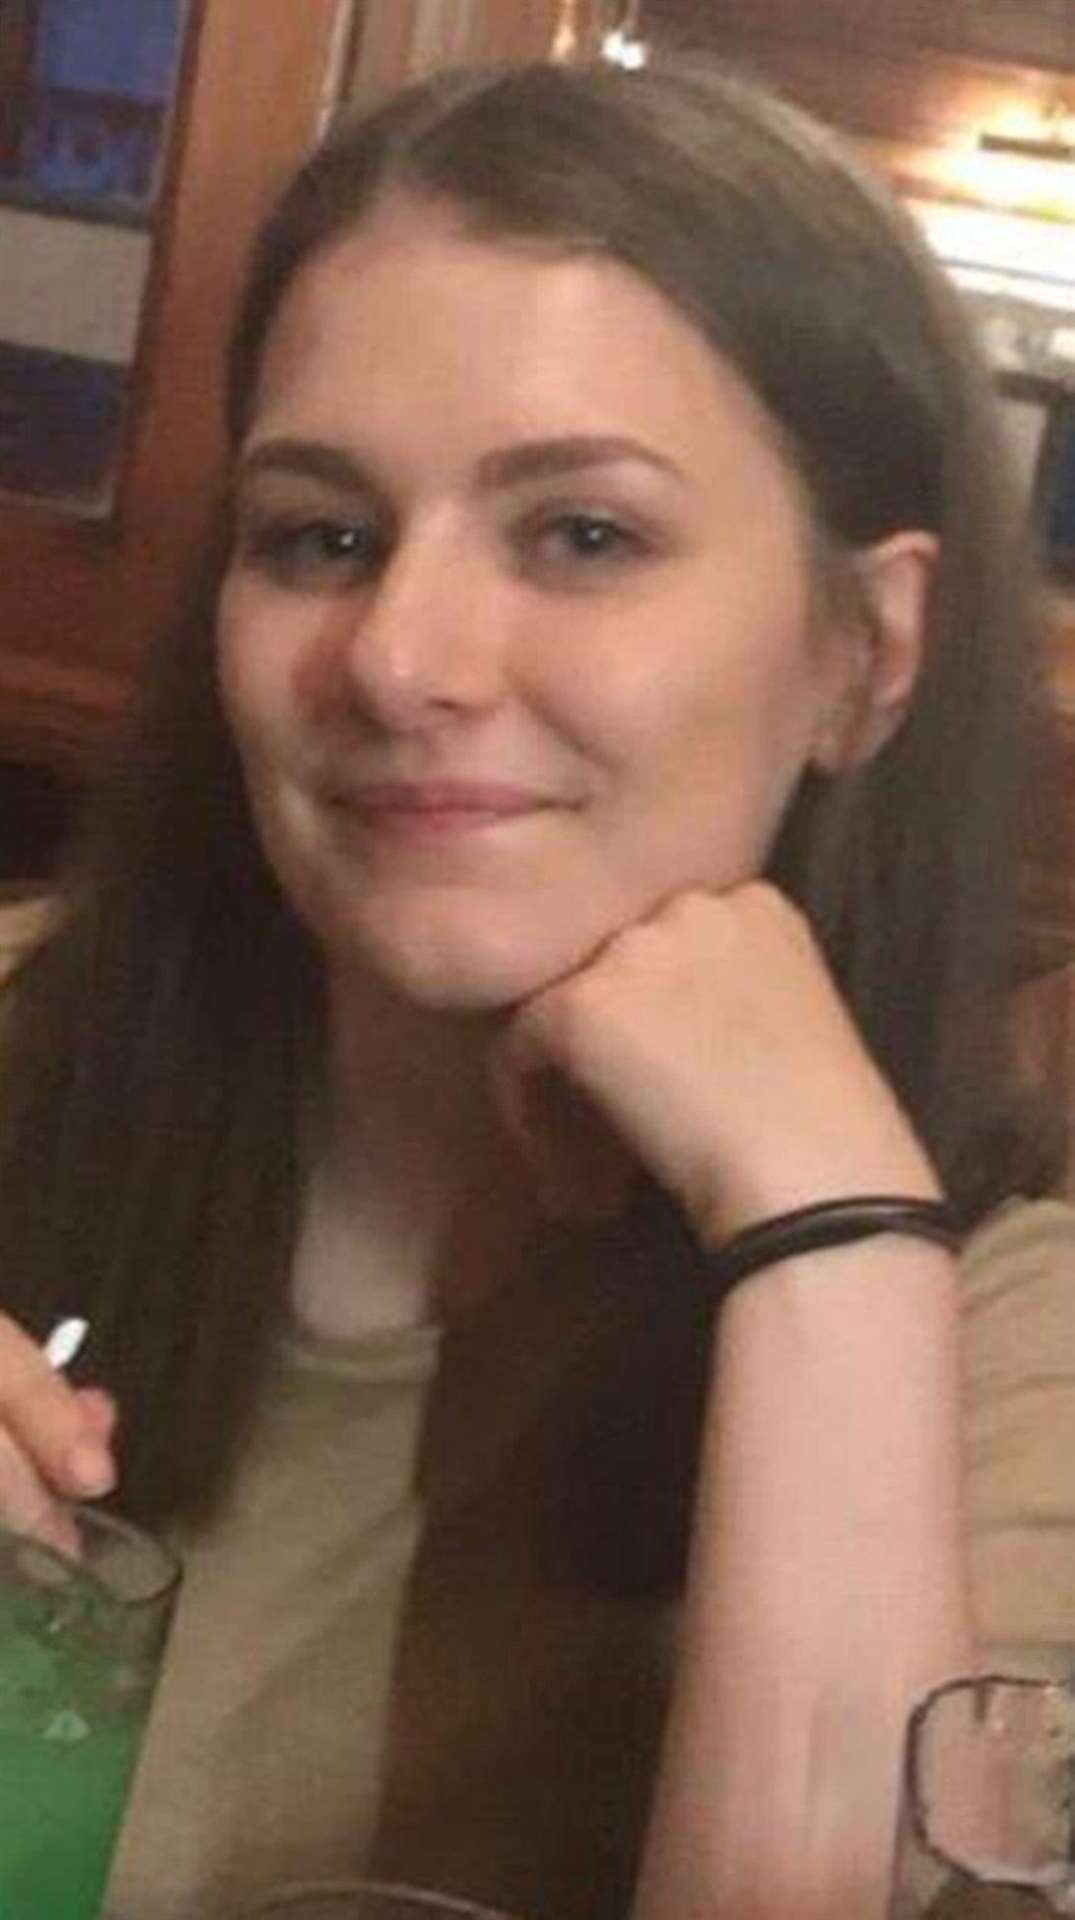 University student Libby Squire was raped and murdered in 2019 while walking home from a night out (Family handout/Humberside Police/PA)